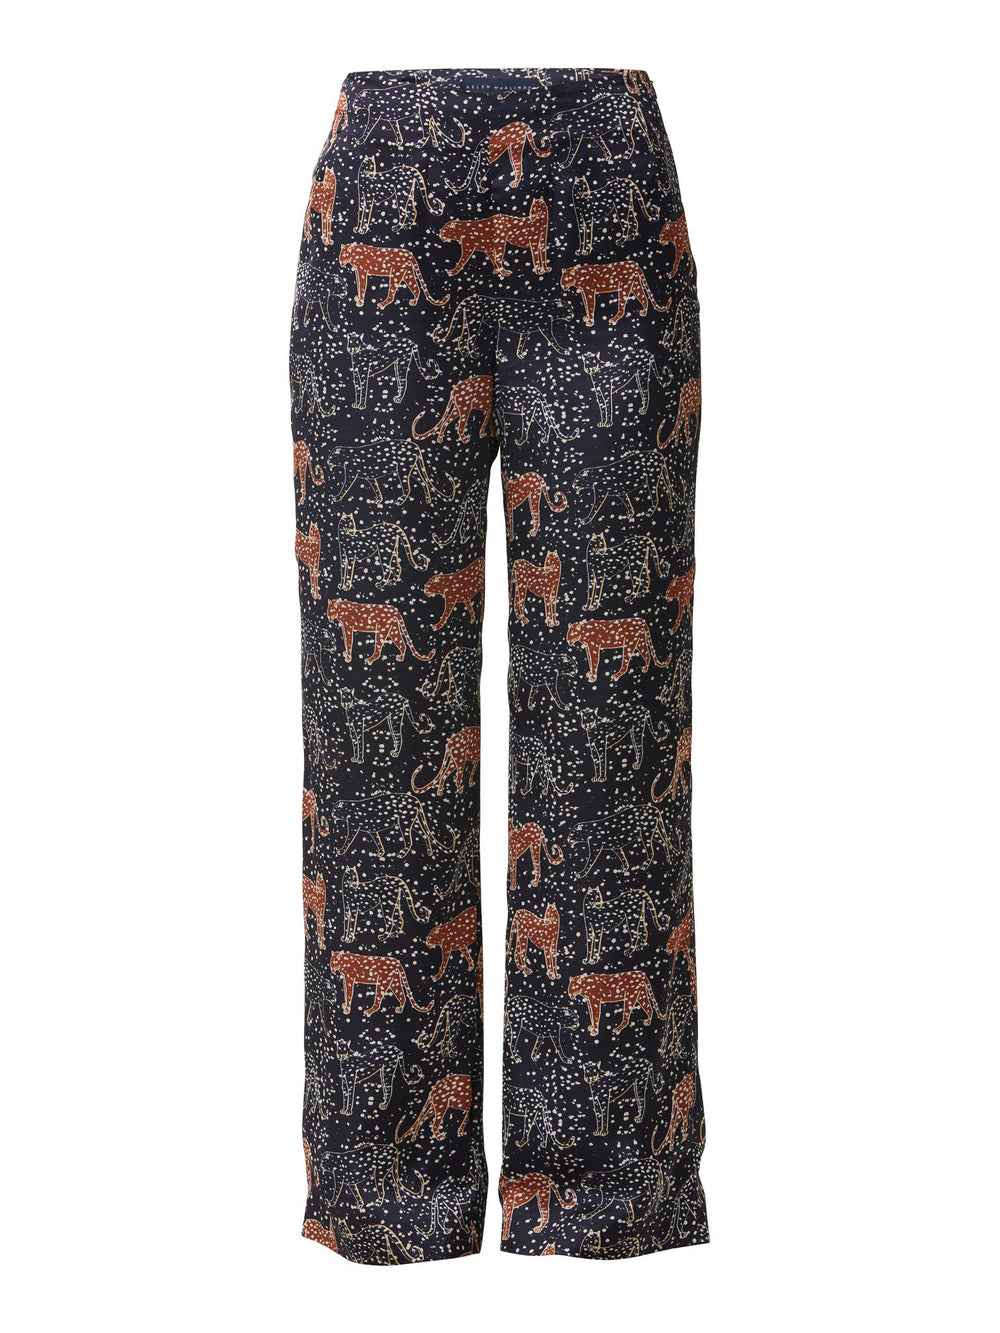 tiger print Palazzo pant fits smoothly over the waist